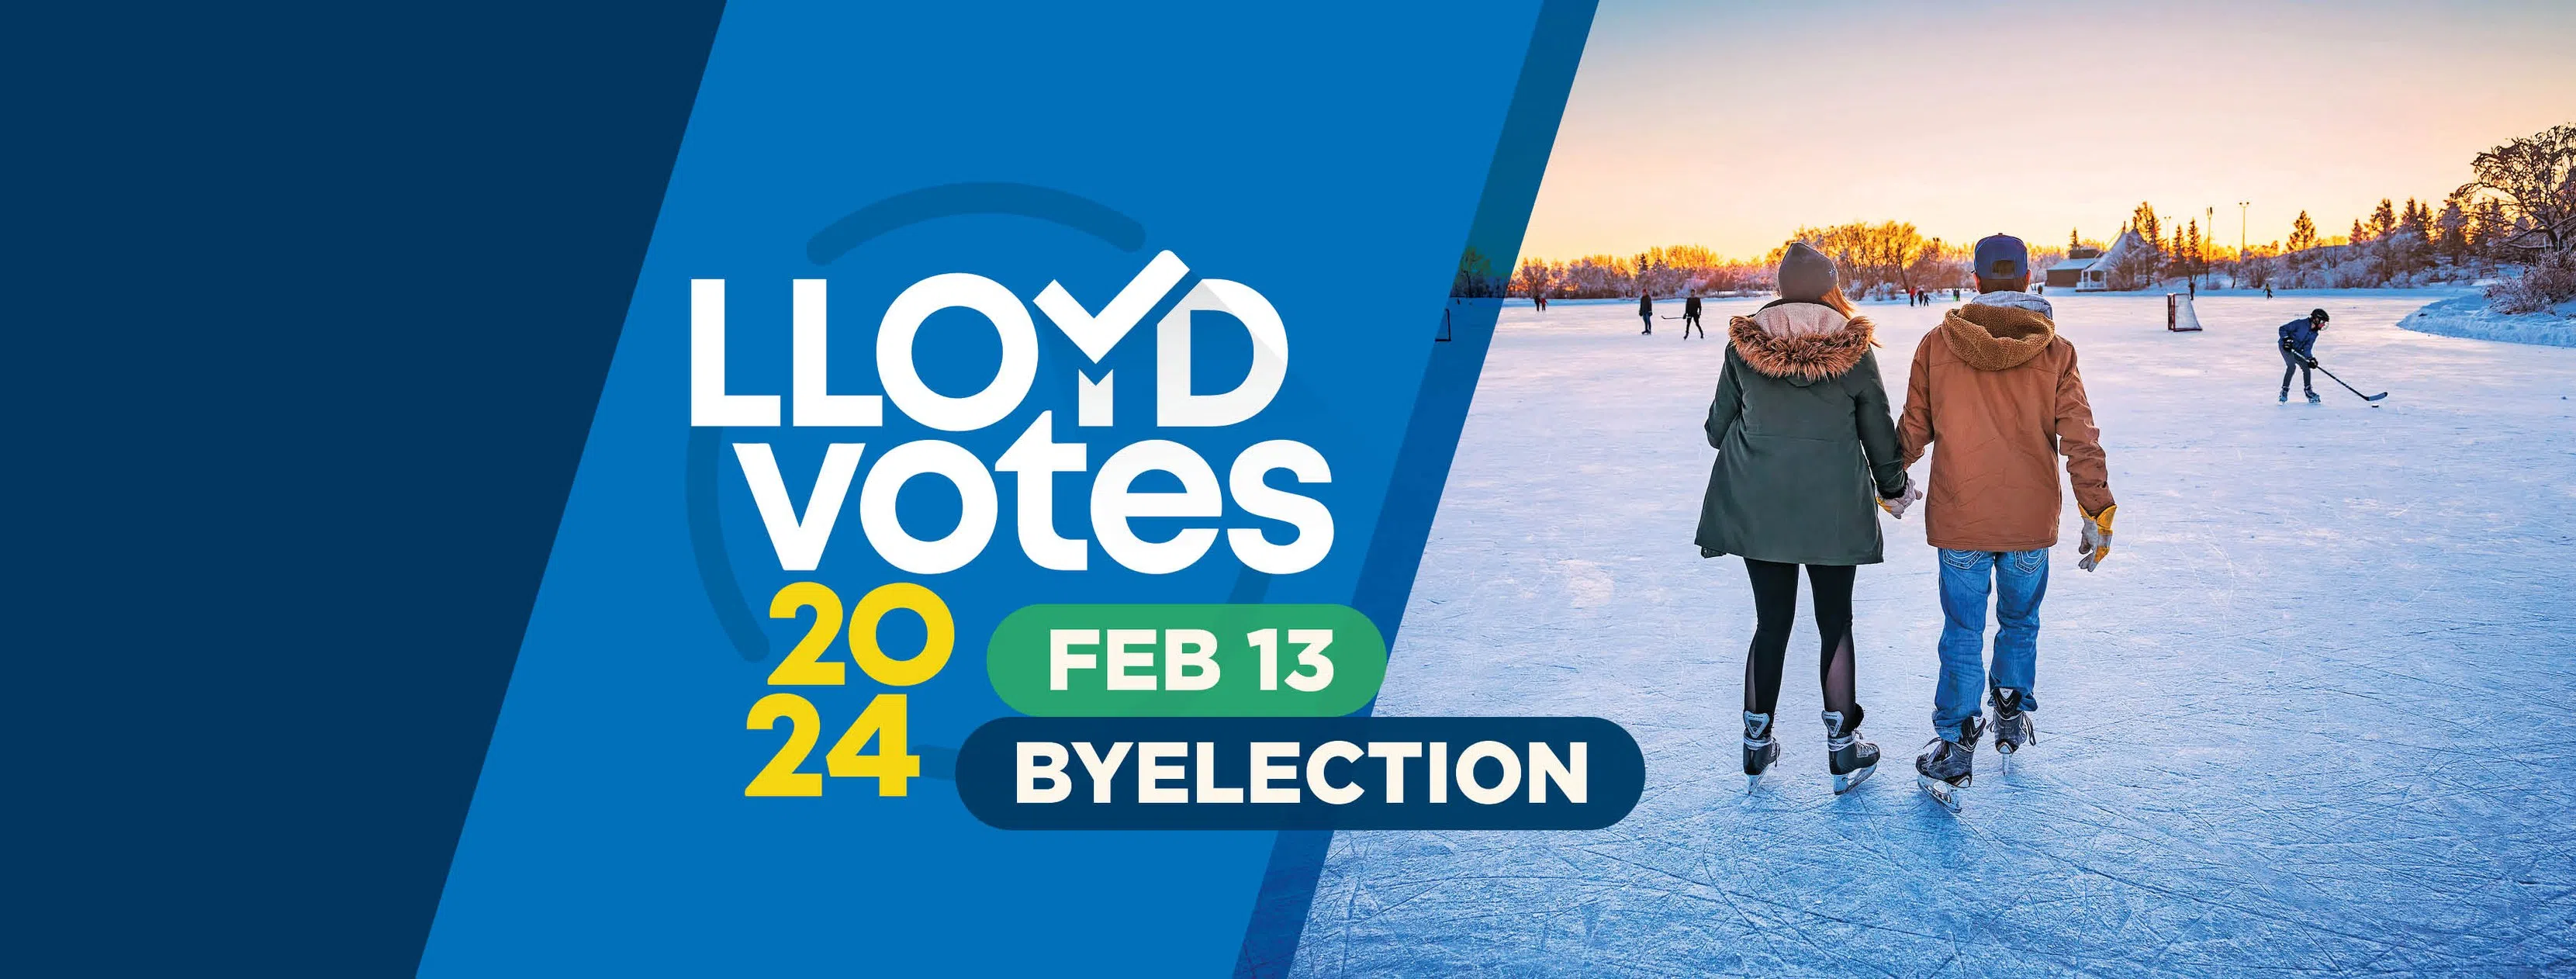 LloydVotes: Official candidates list for byelection, how to vote